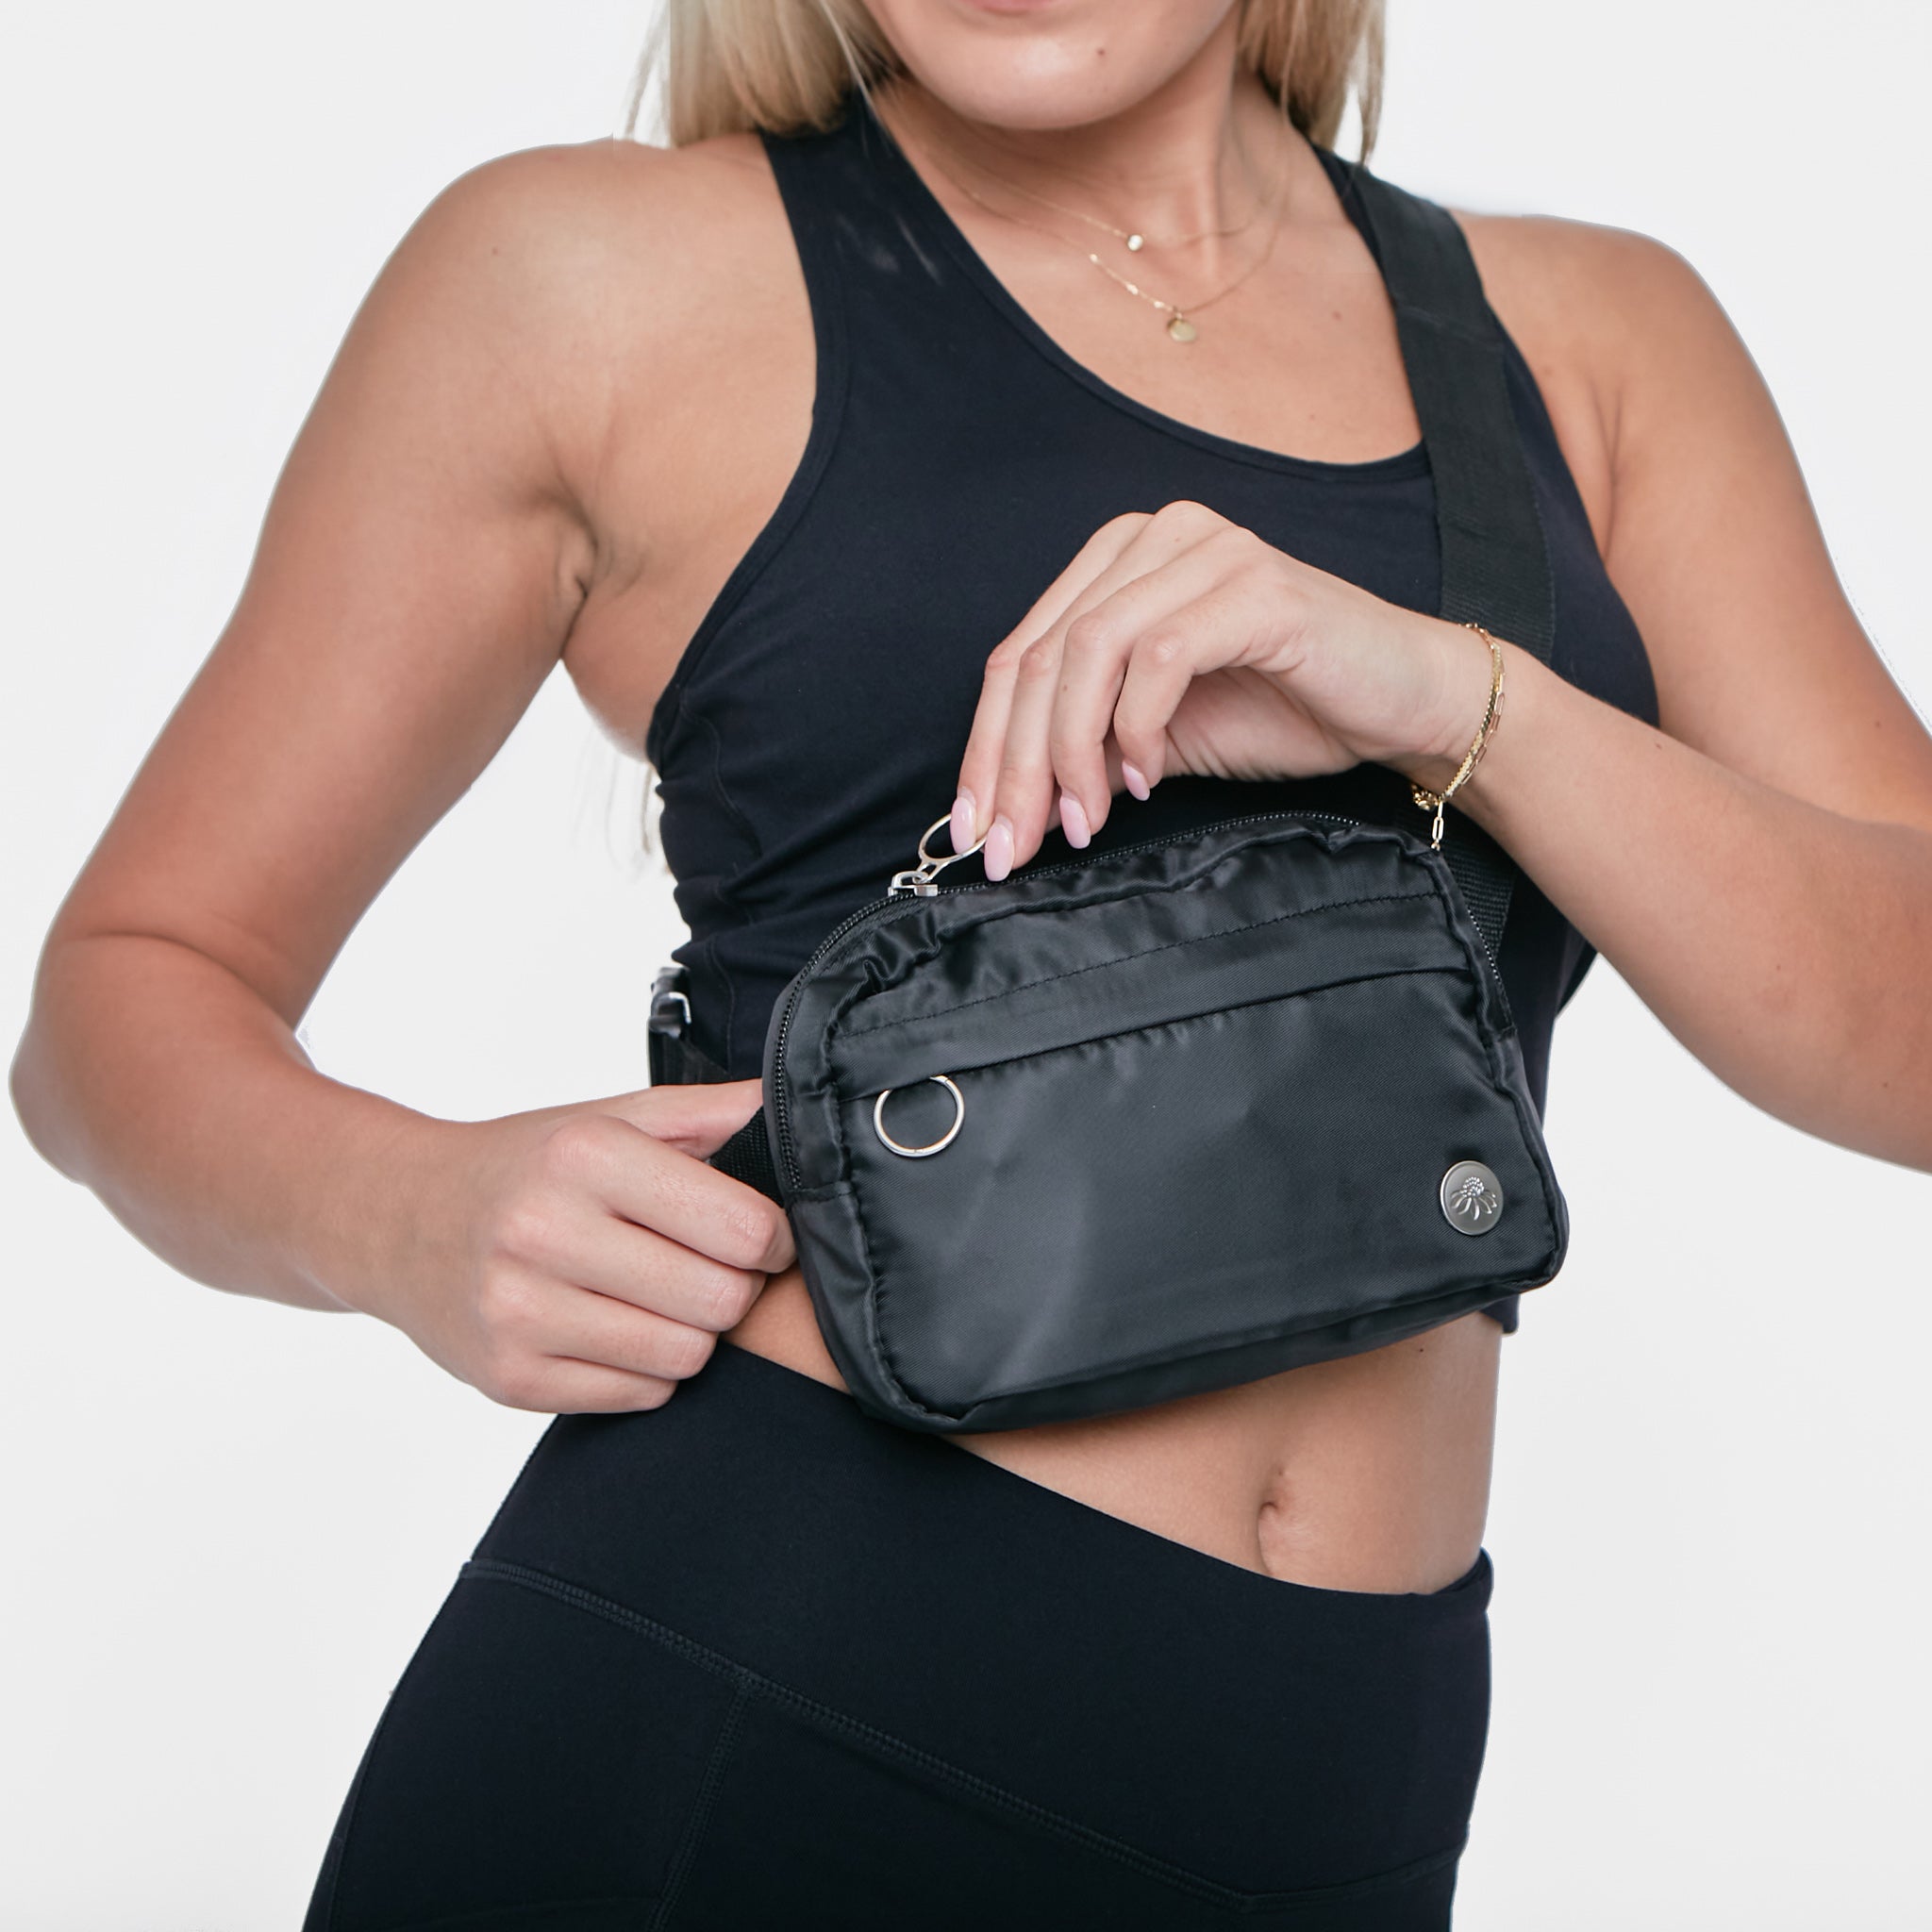 Zodaca Plus Size Black Fanny Pack, Crossbody Bag with Adjustable Belt Straps Fits 34-60 inch Waist (expands to 5XL)